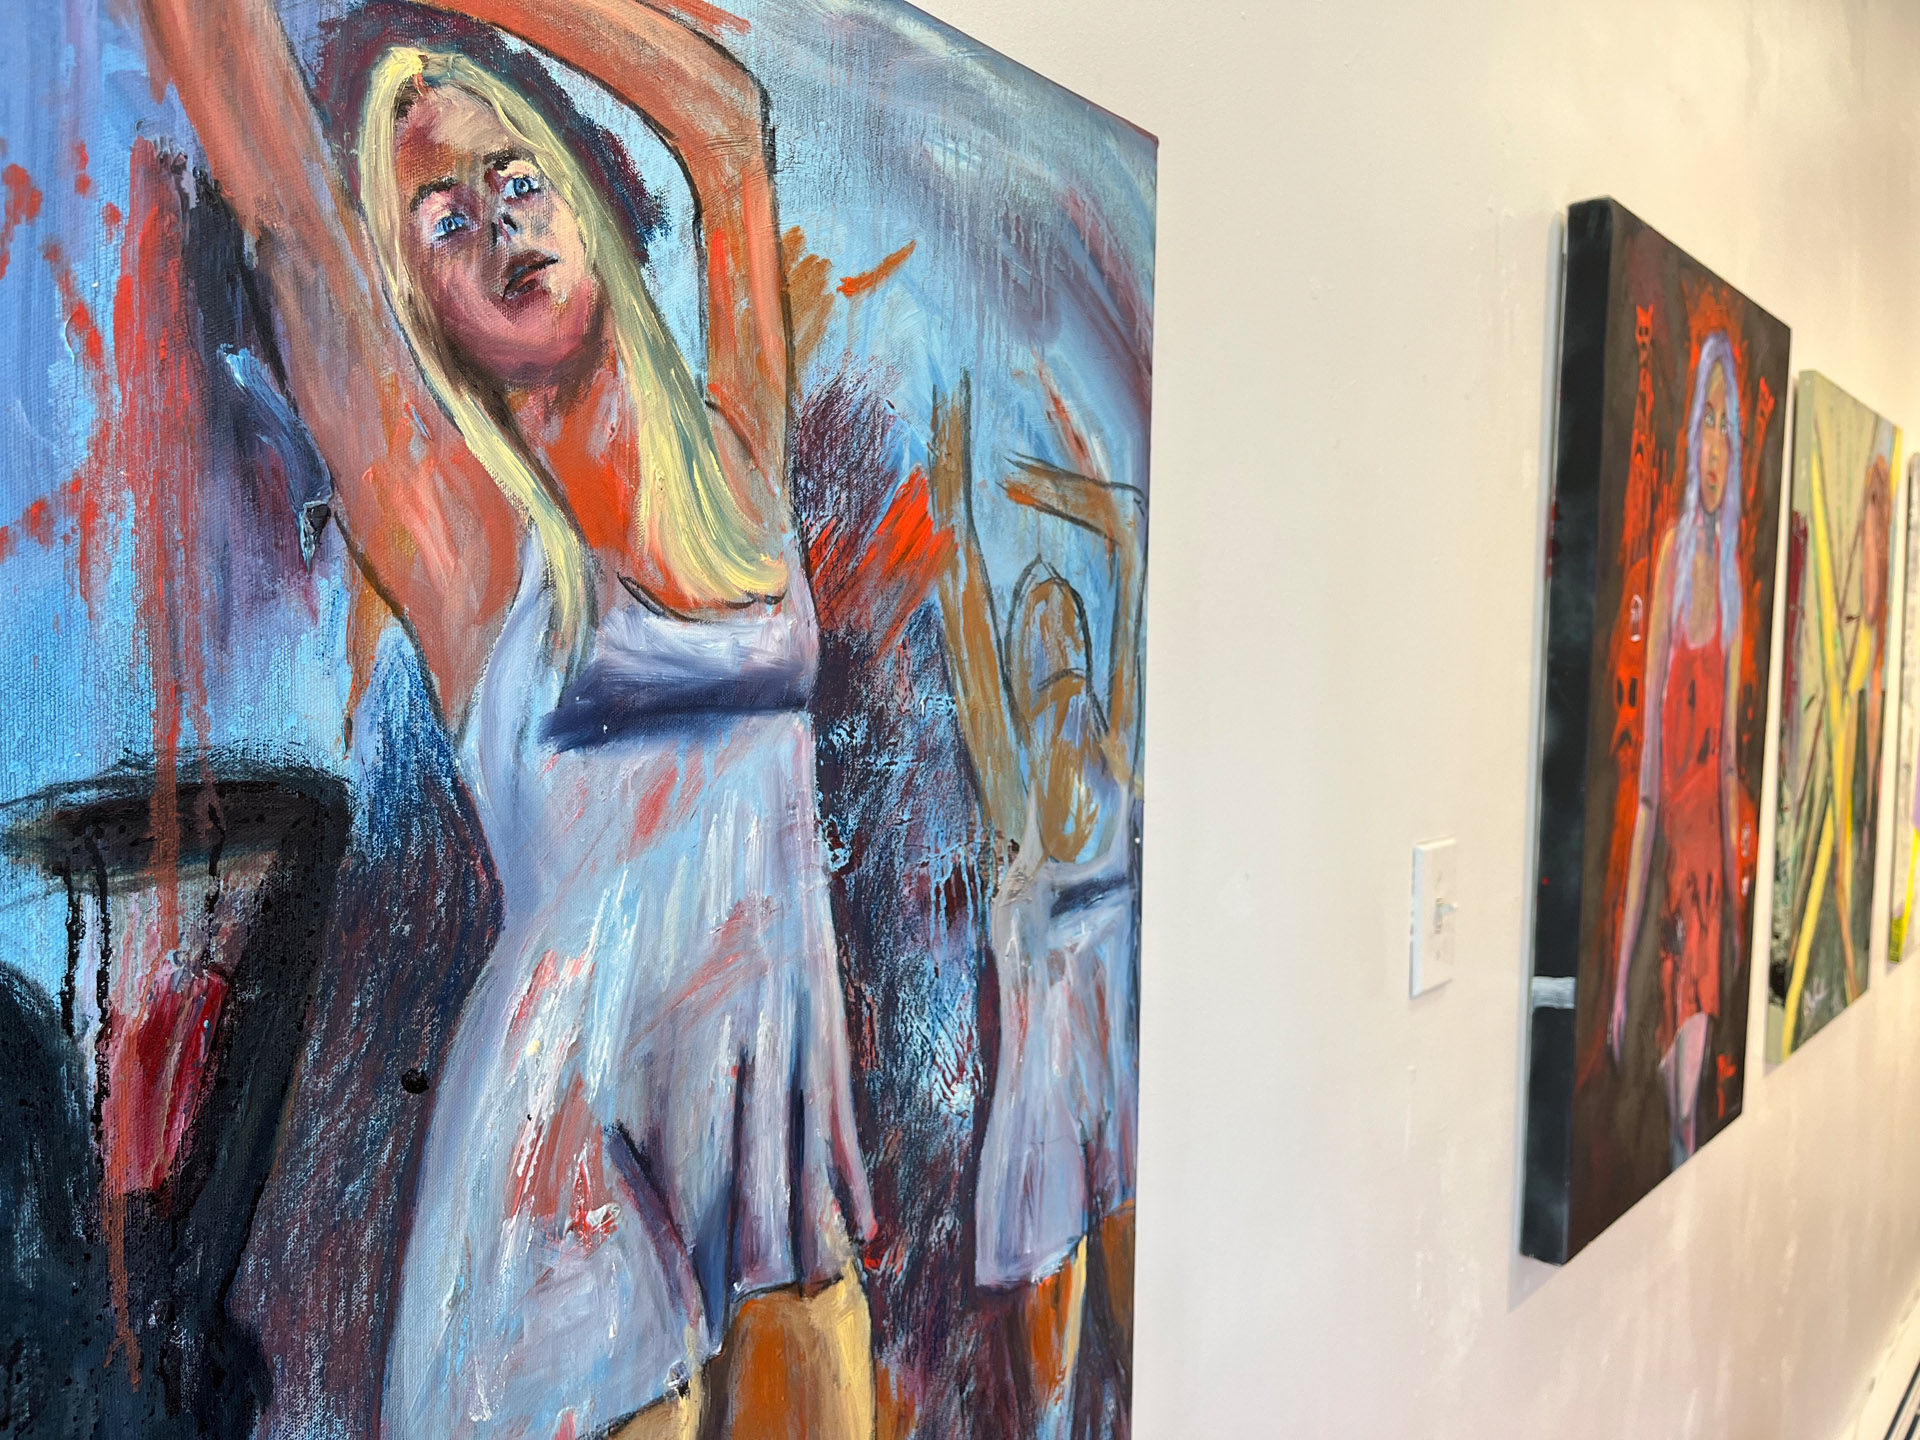 HER BODY, HER CHOICE- A Solo Exhibition by master Artist Ric Conn